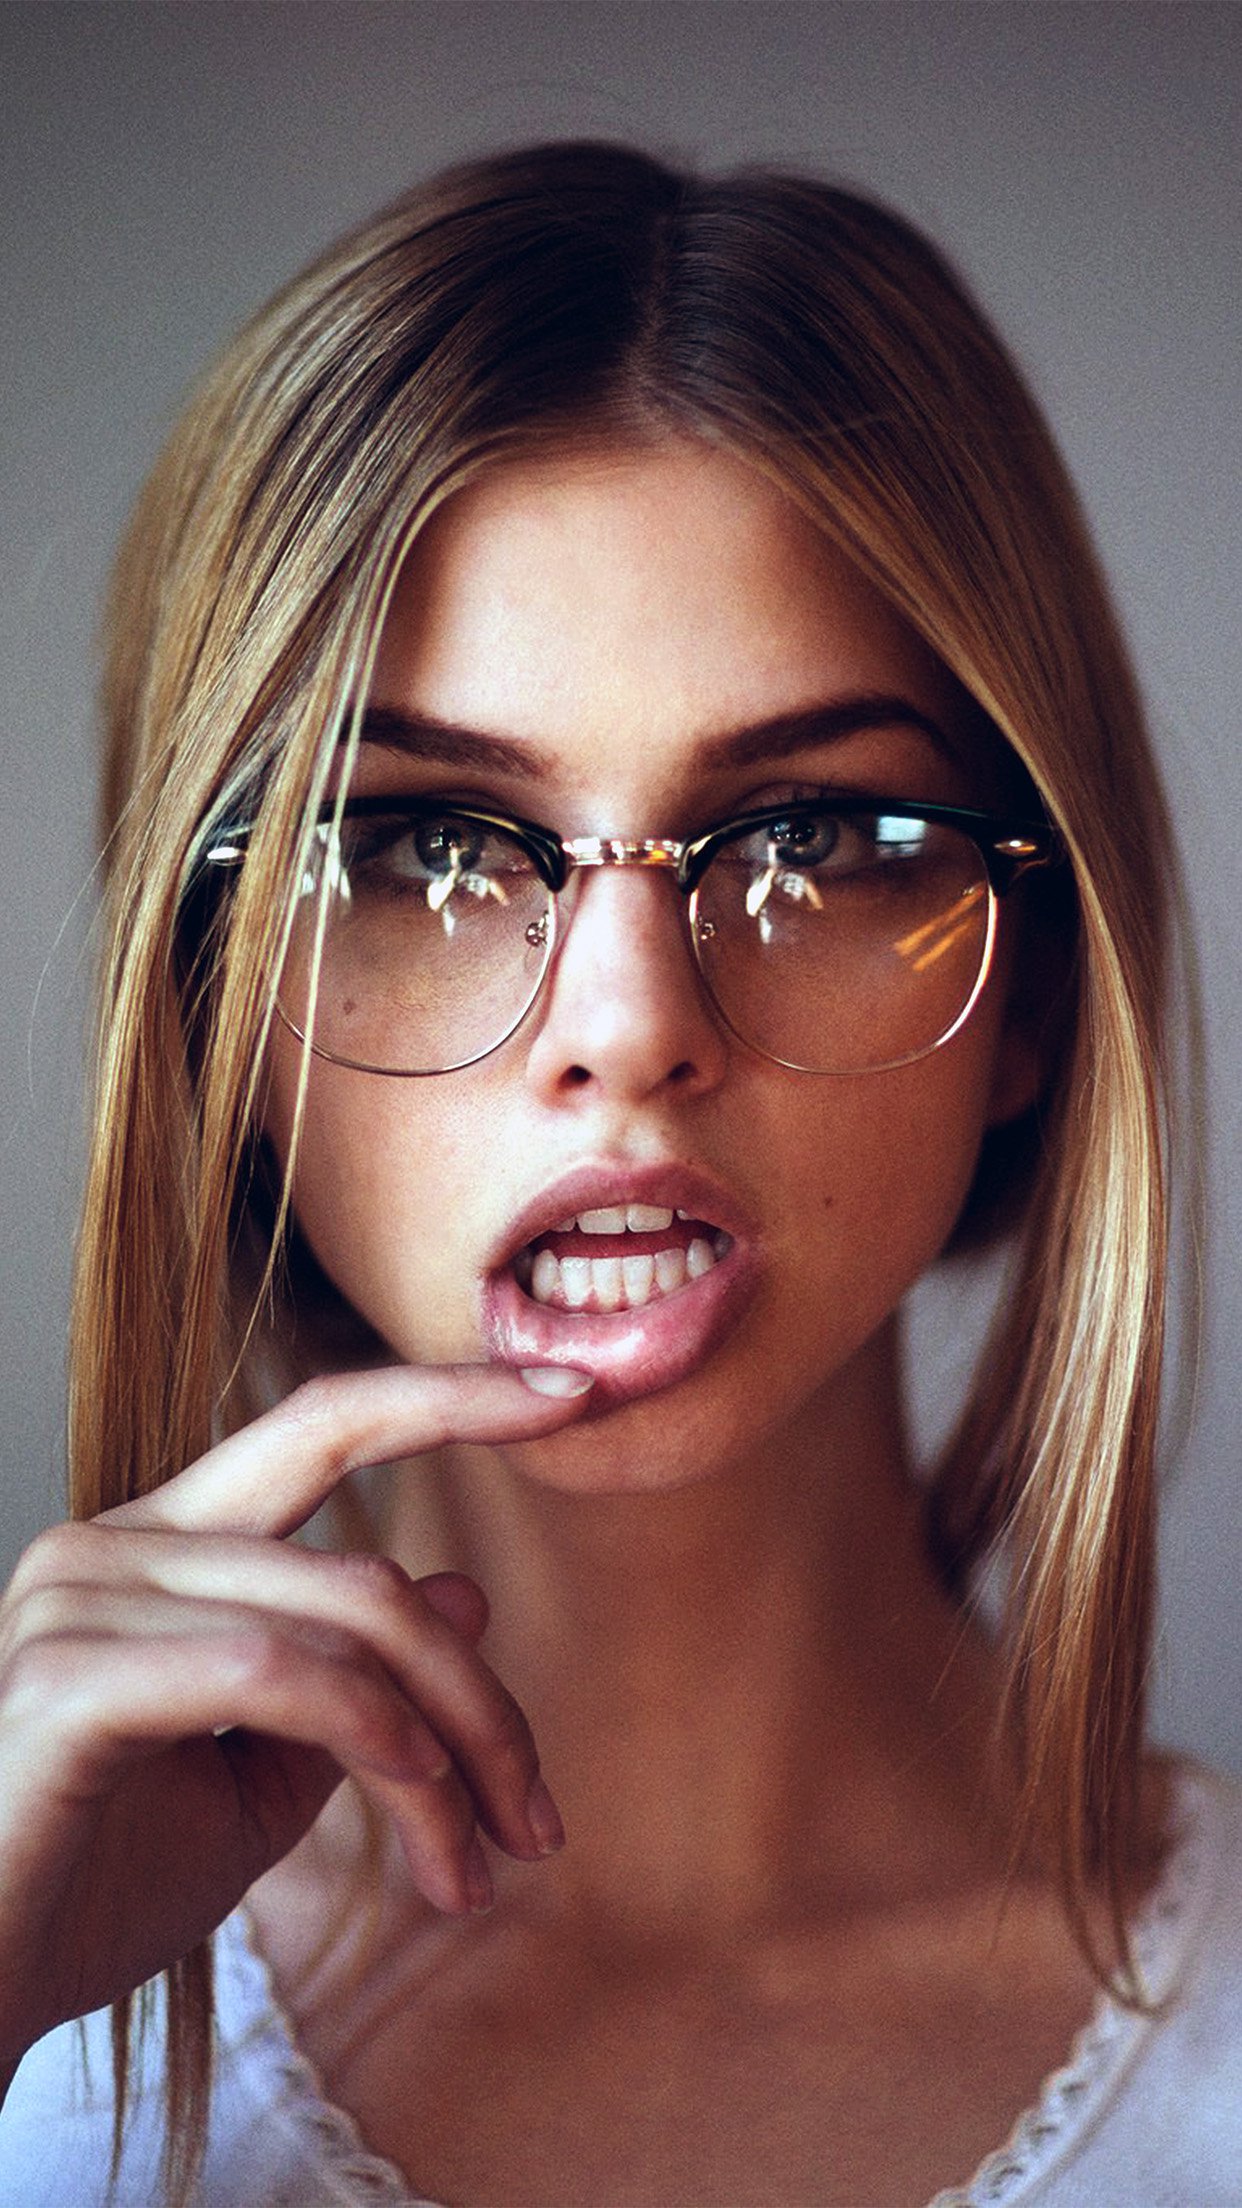 Girl Glasses Lips Beauty Face Android wallpaper - Android HD wallpapers